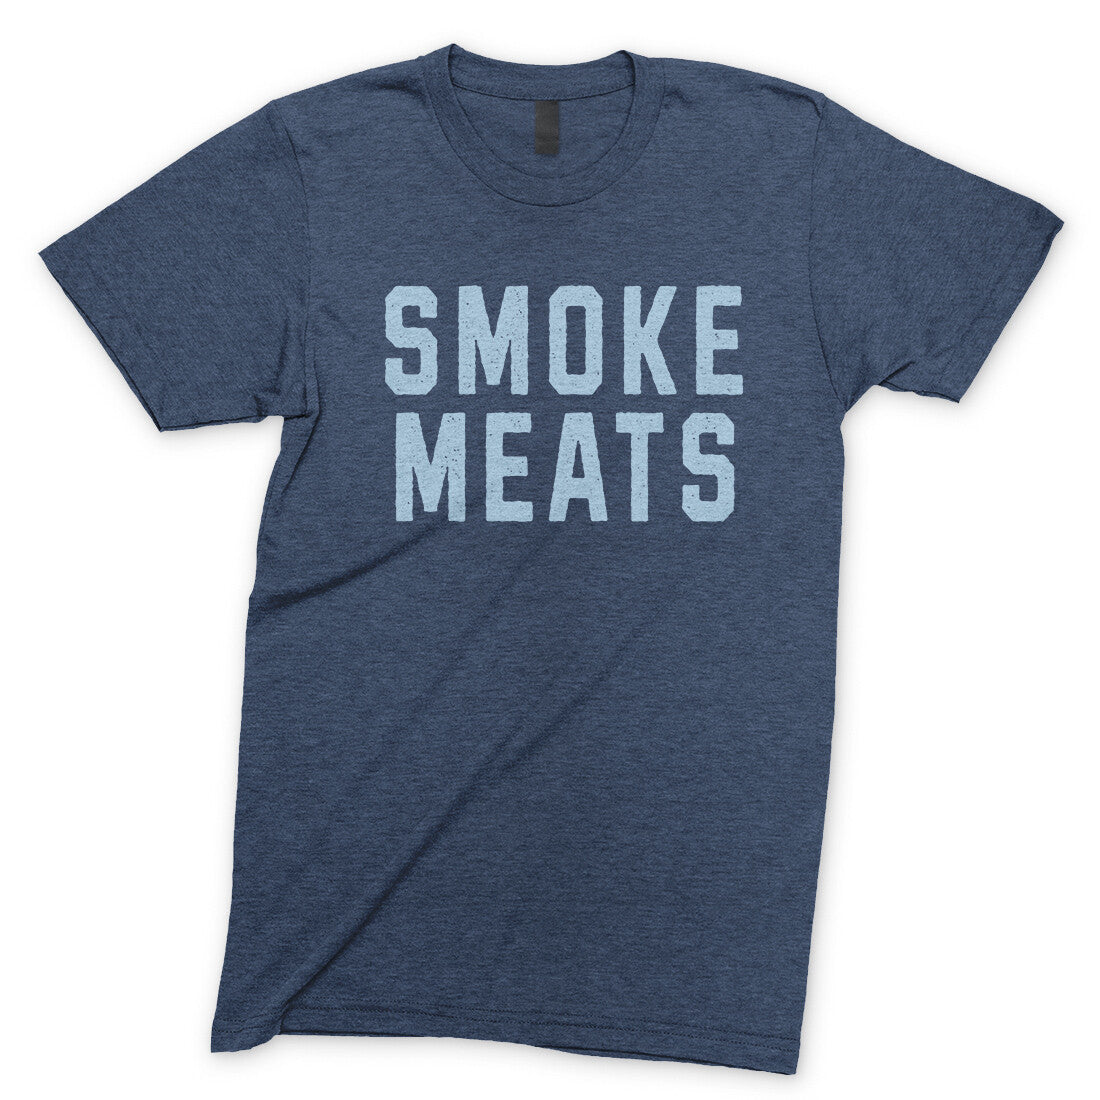 Smoke Meats in Navy Heather Color